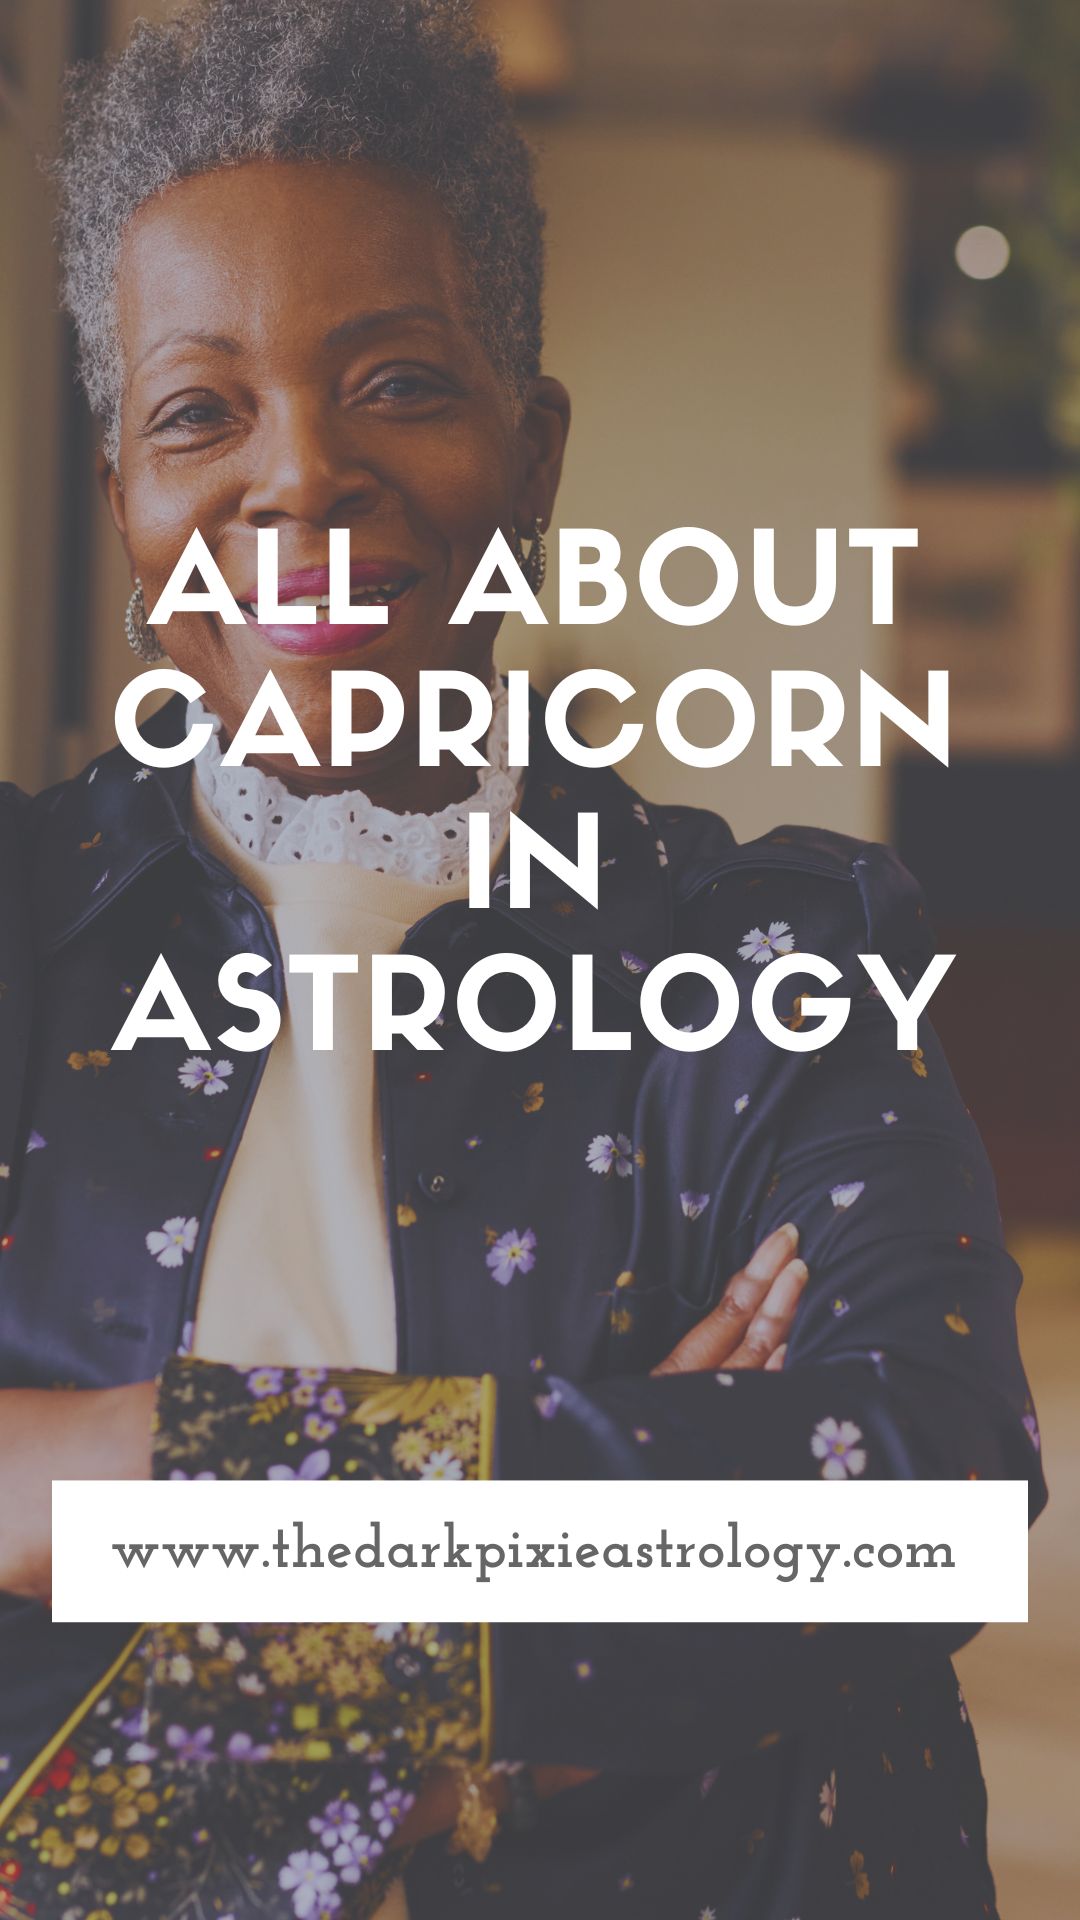 All About Capricorn in Astrology - The Dark Pixie Astrology